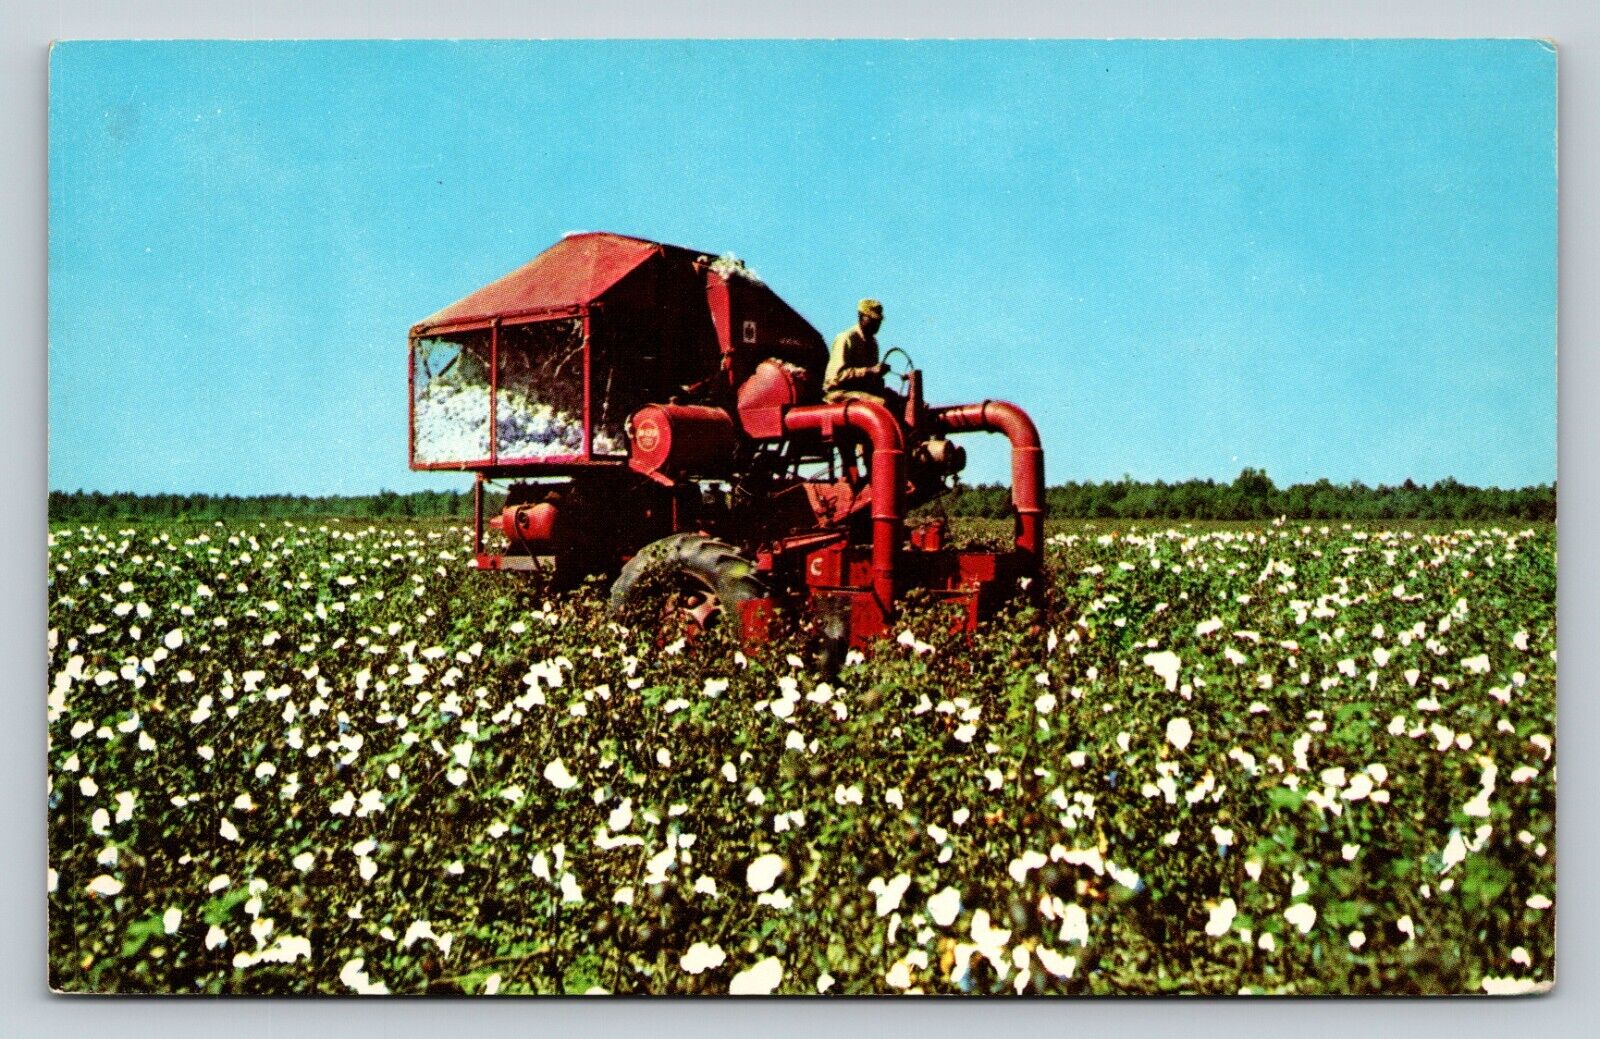 Red Mechanical Cotton Picker in the Cotton Field Vintage Postcard 1636